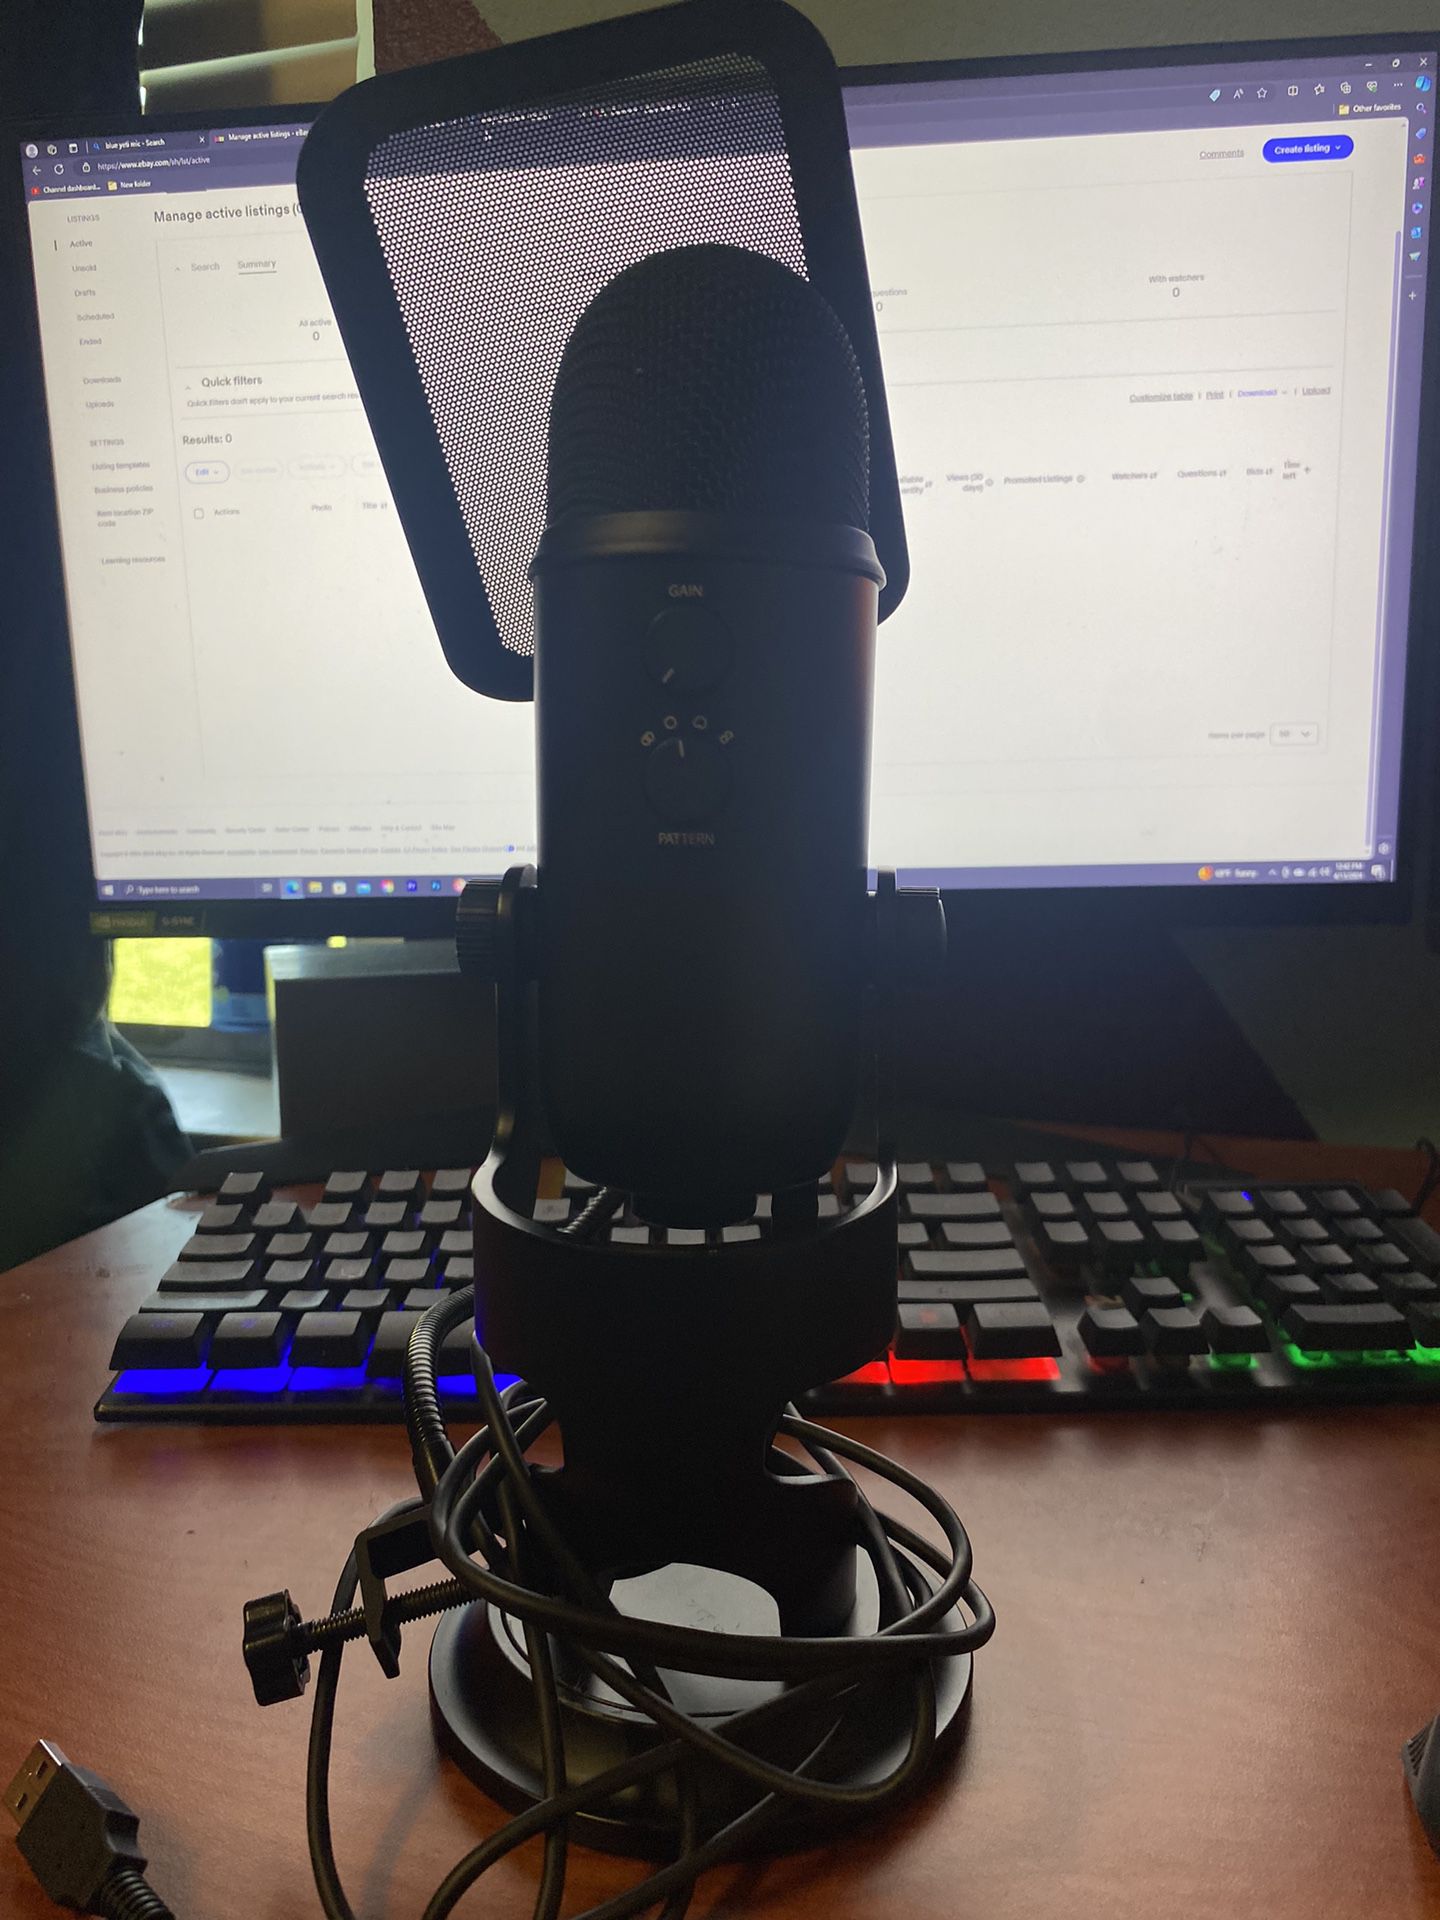 Blue Yeti Usb Microphone For Recording